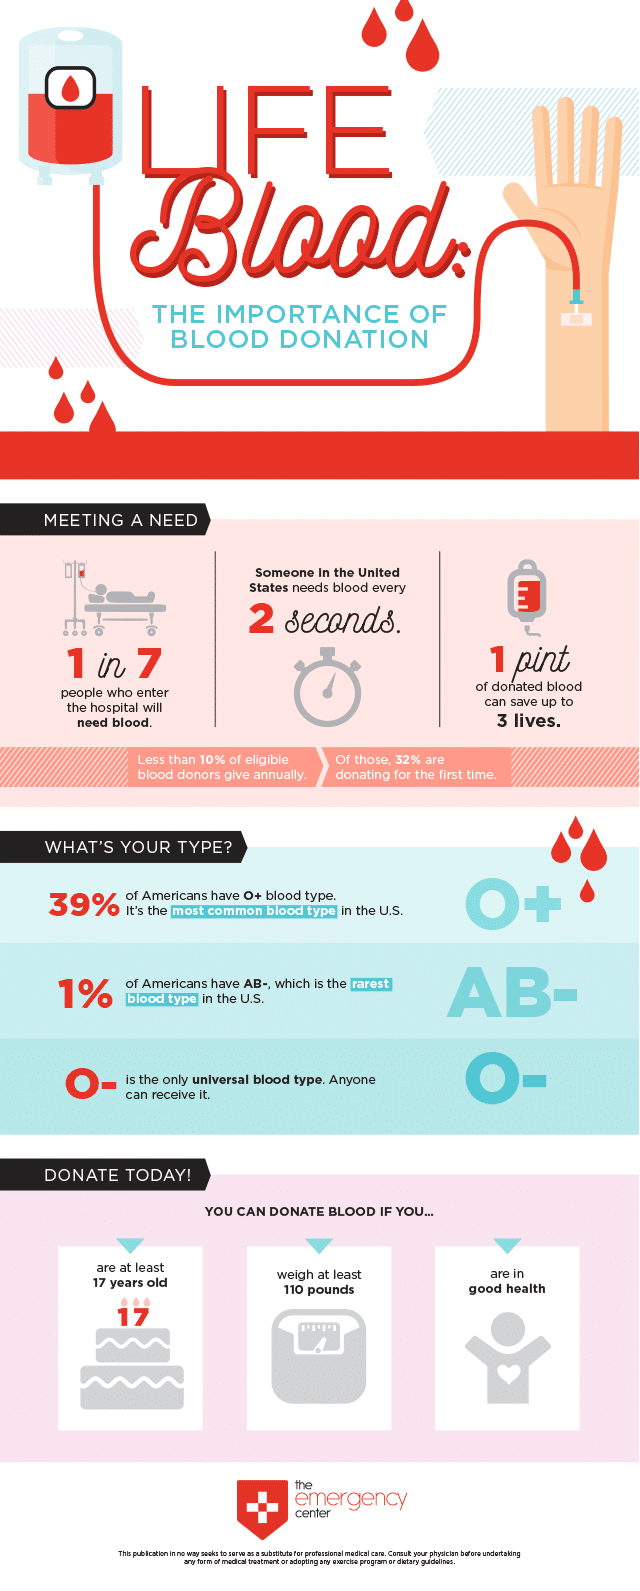 Life Blood: The Importance of Blood Donation | The Emergency Center